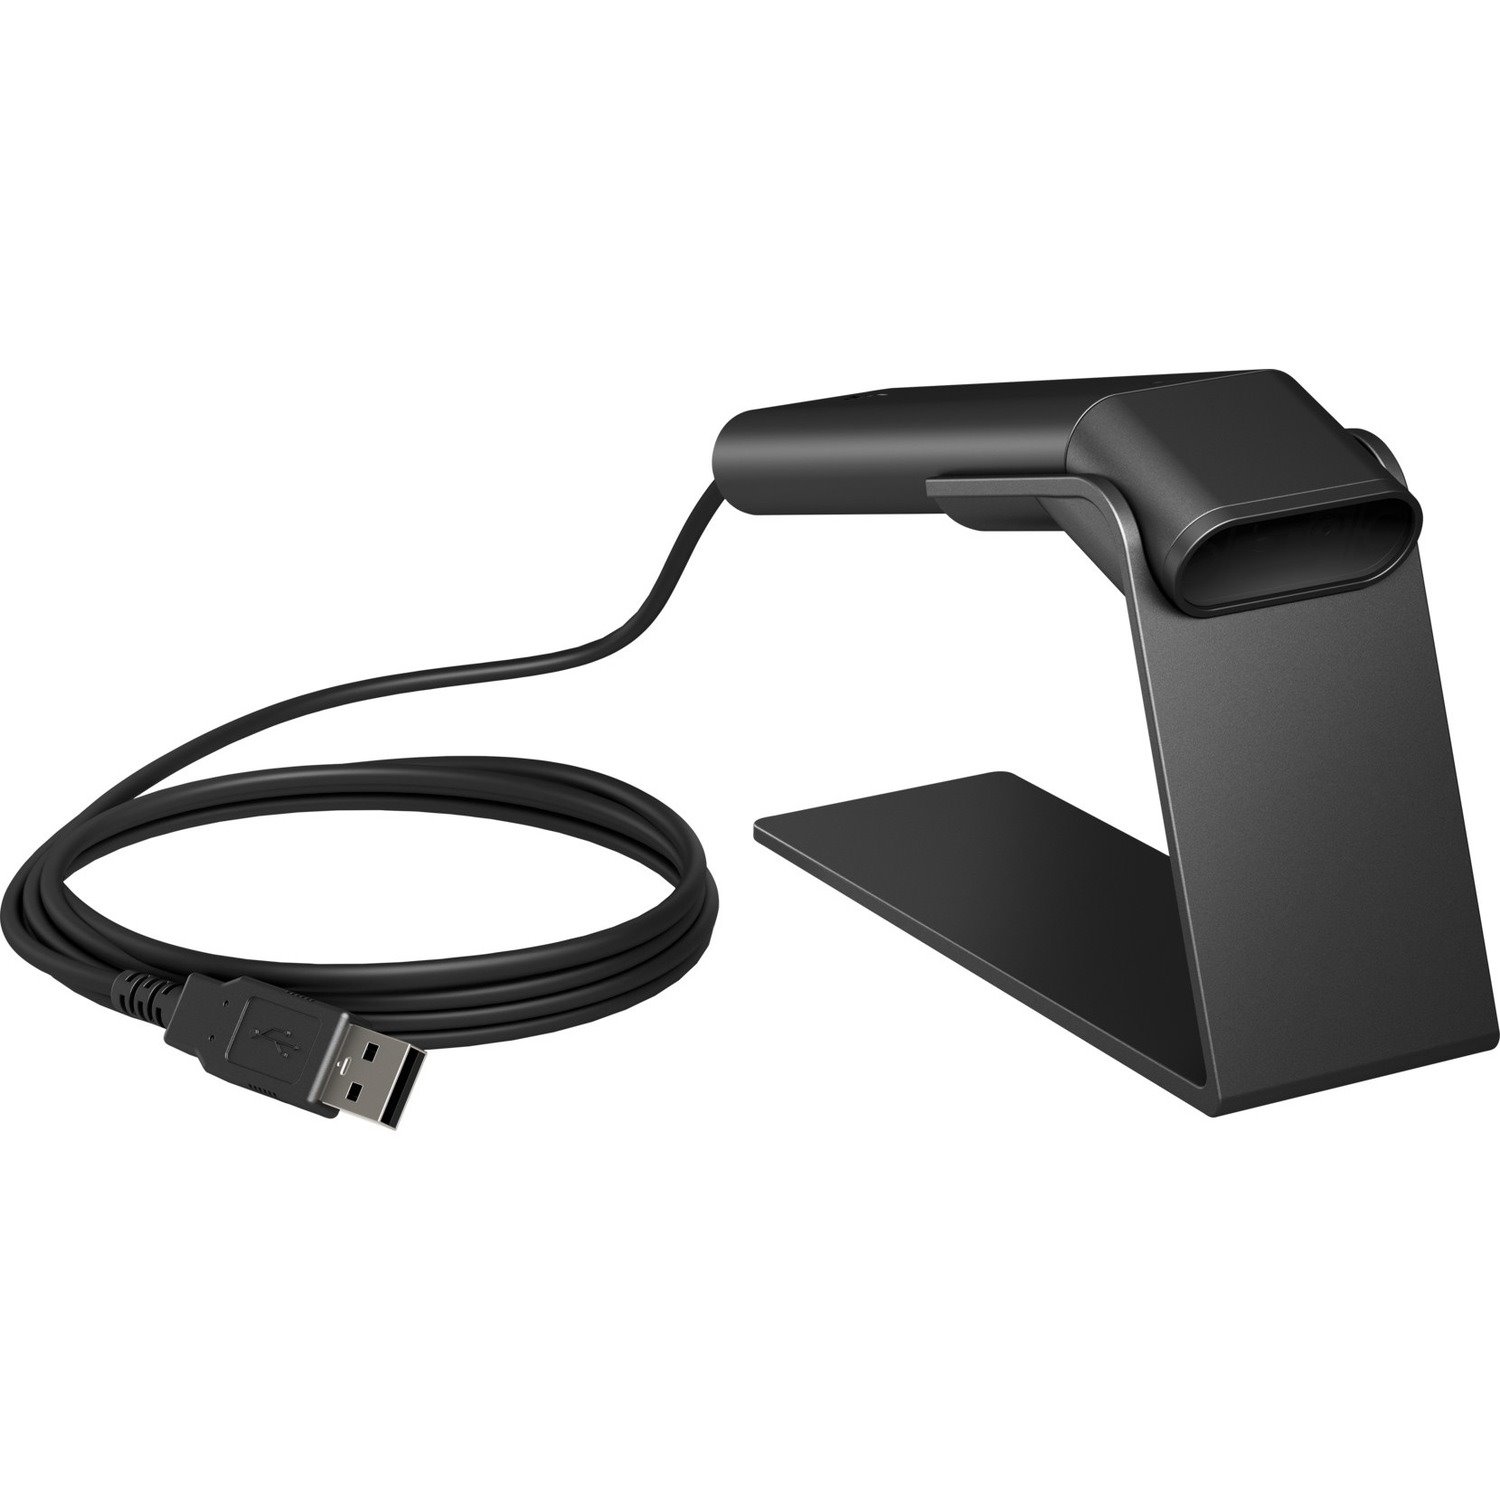 HP ElitePOS Handheld Barcode Scanner - Cable Connectivity - Ebony Black - USB Cable Included